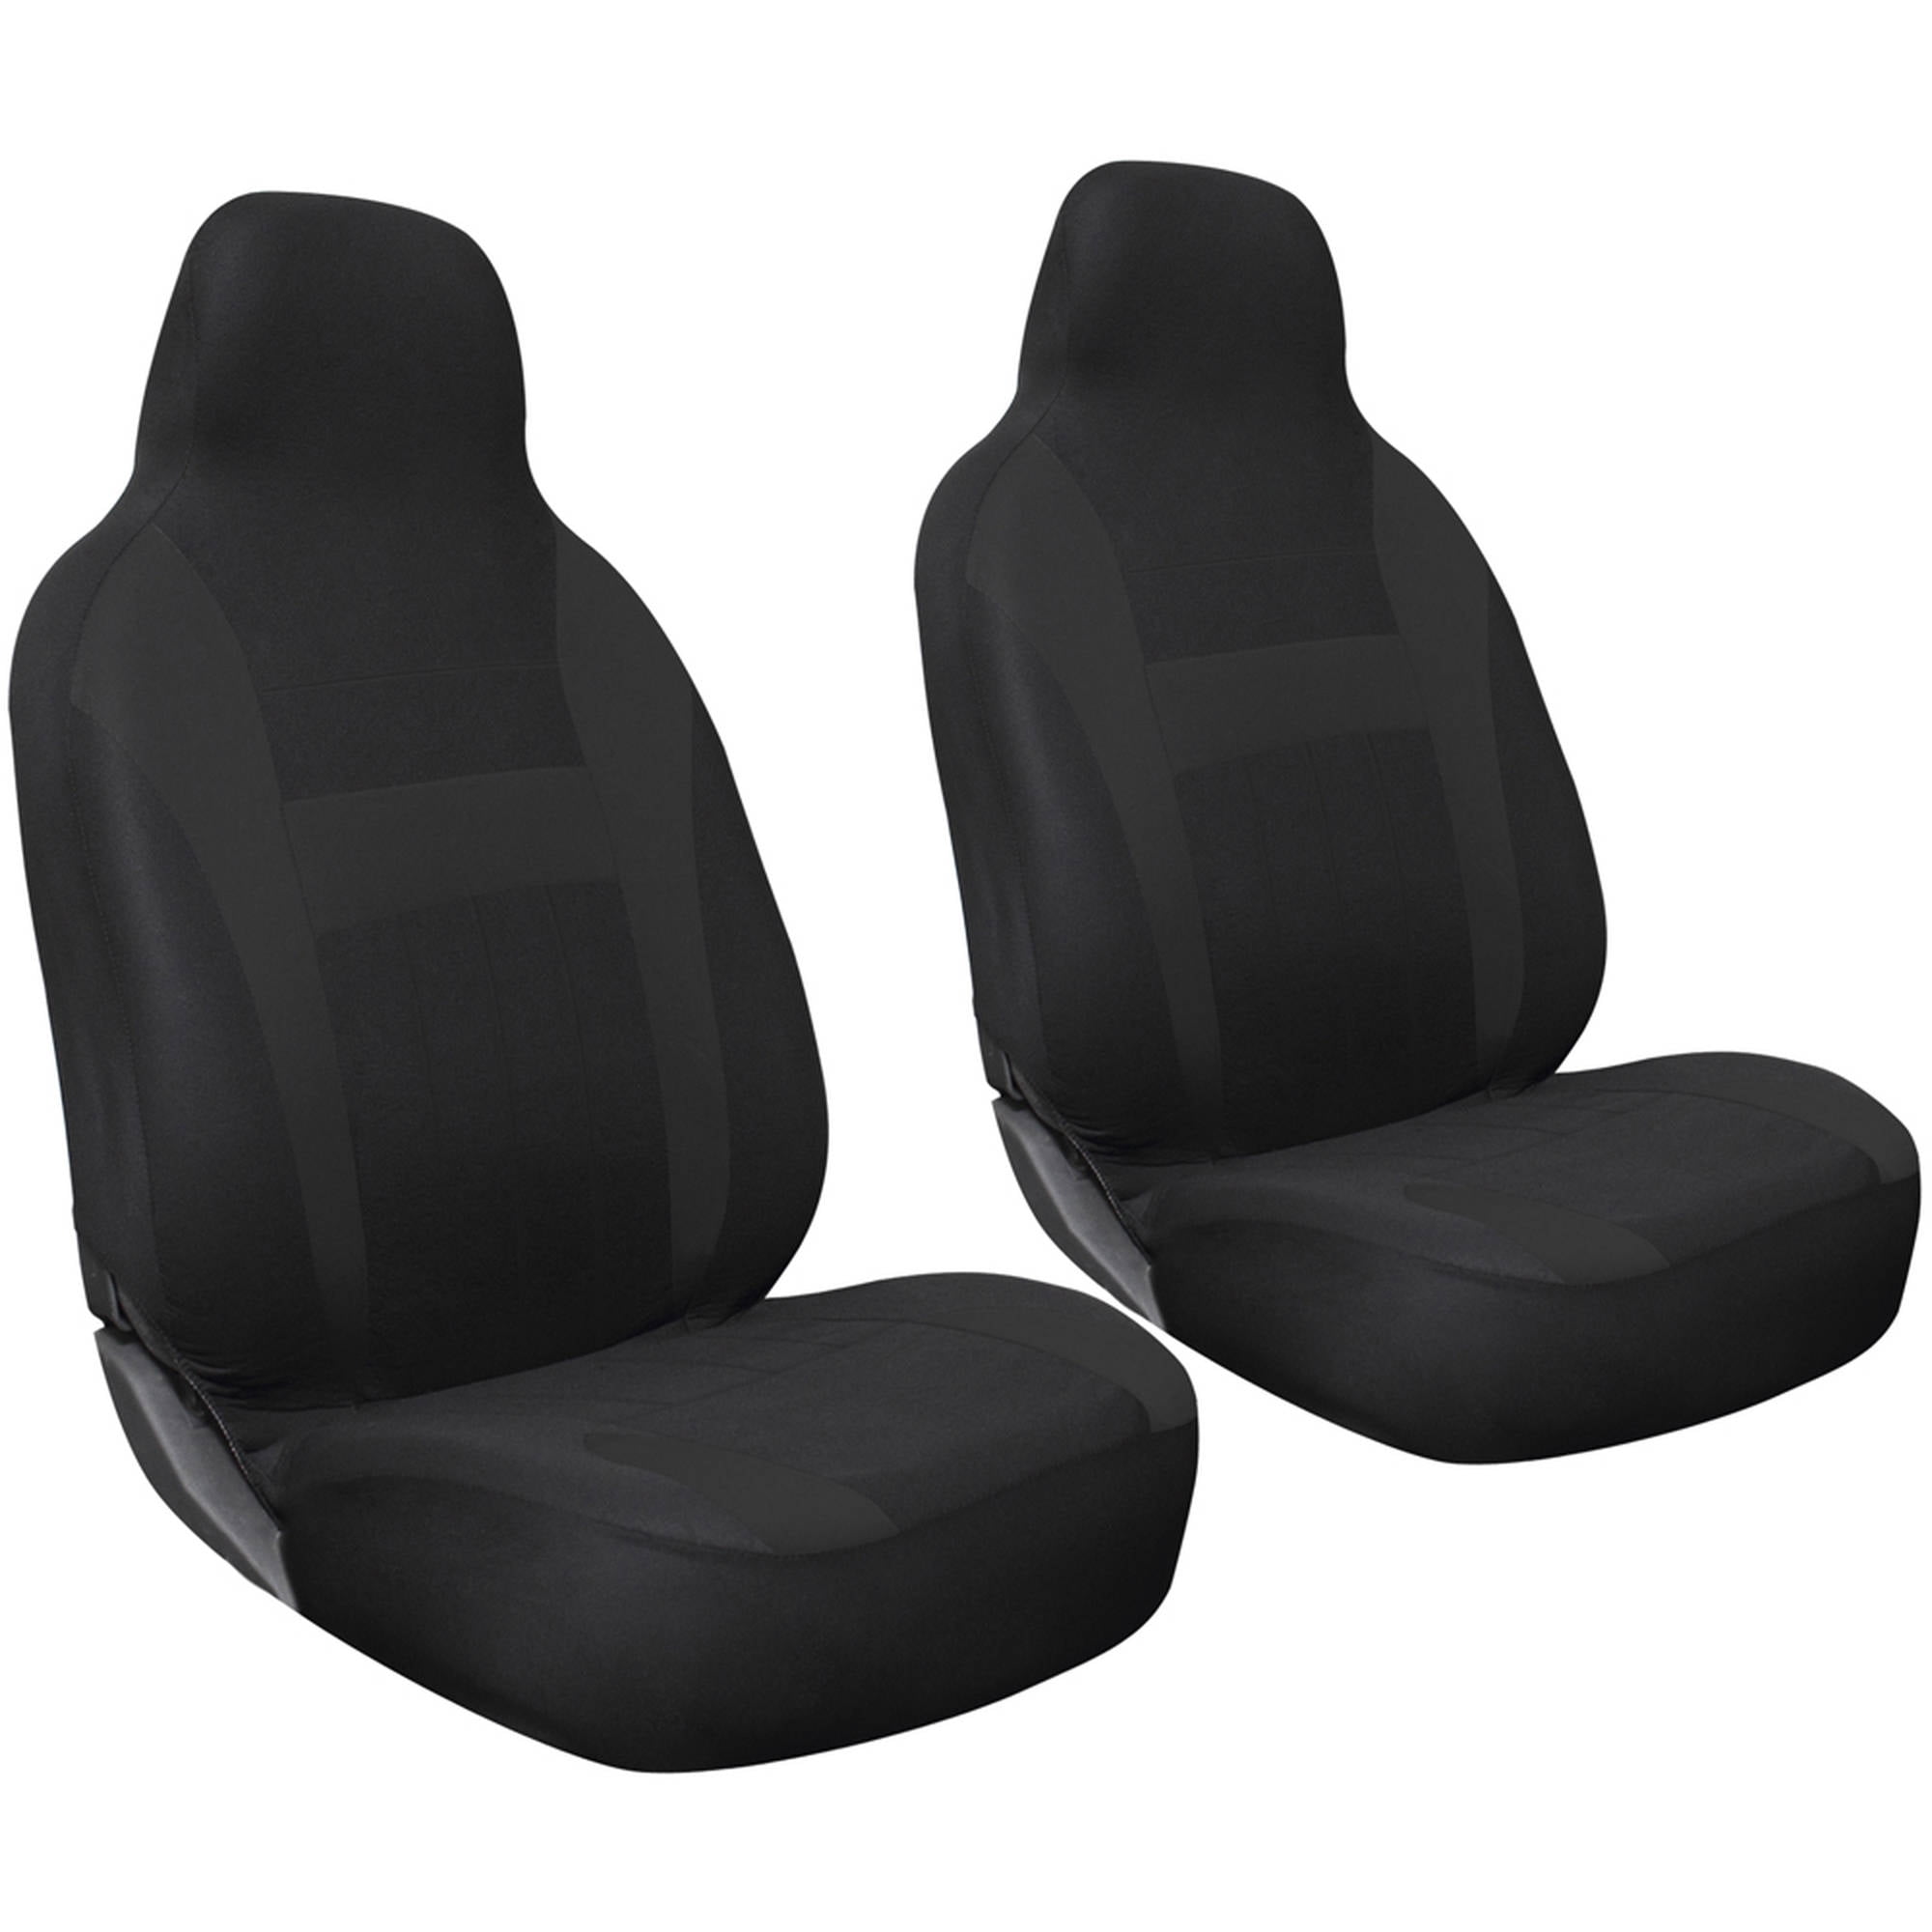 Dash Mat Universal Seat Covers For Auto SUV Van Solid Black Full Set w 